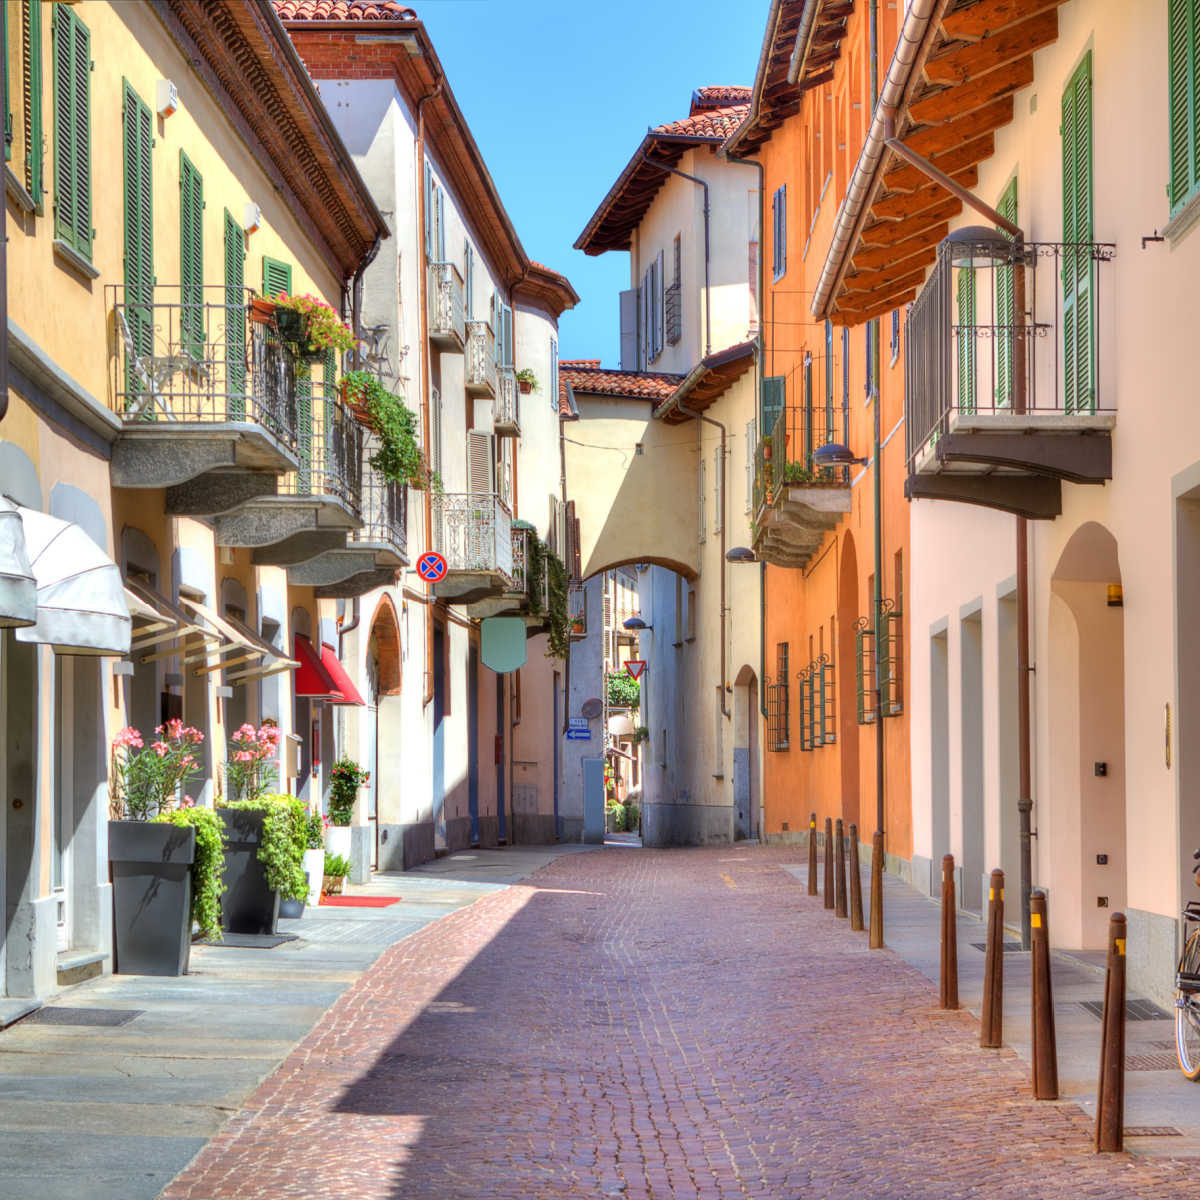 Narrow stone paved street among colorful houses in town of Alba in Piedmont, Northern Italy.